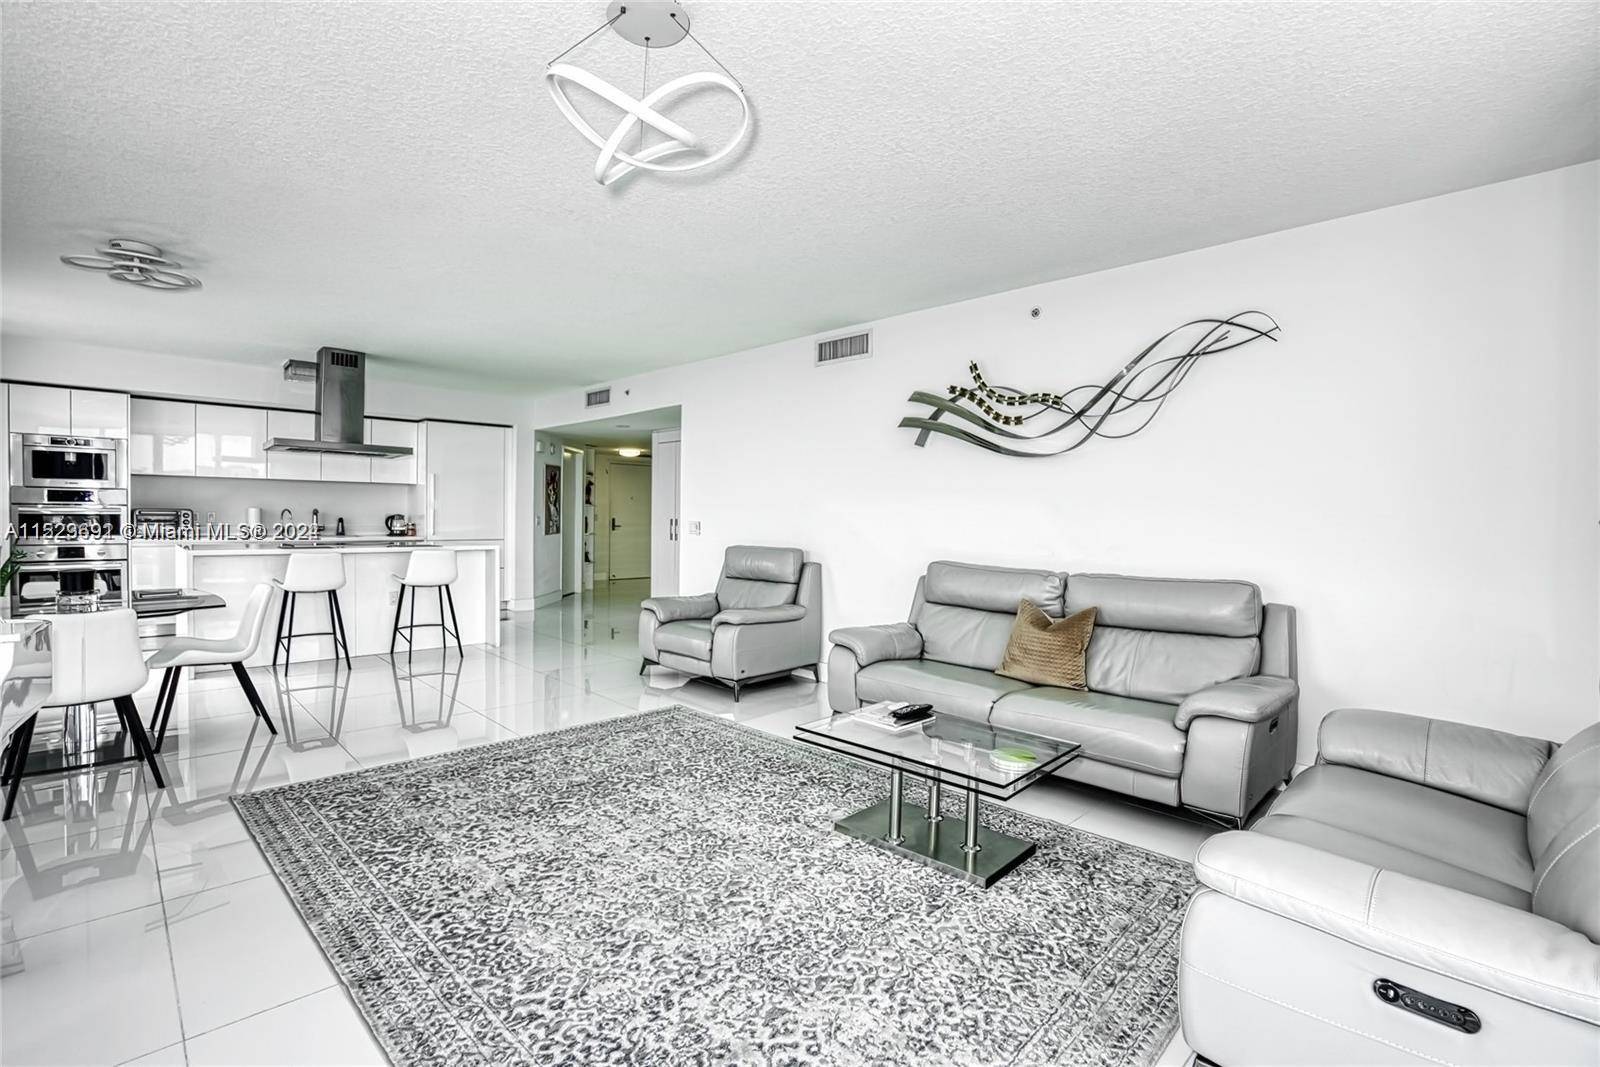 Enjoy unobstructed views to the intracoastal and a very spacious floor plan, with 3 bedroom 3.